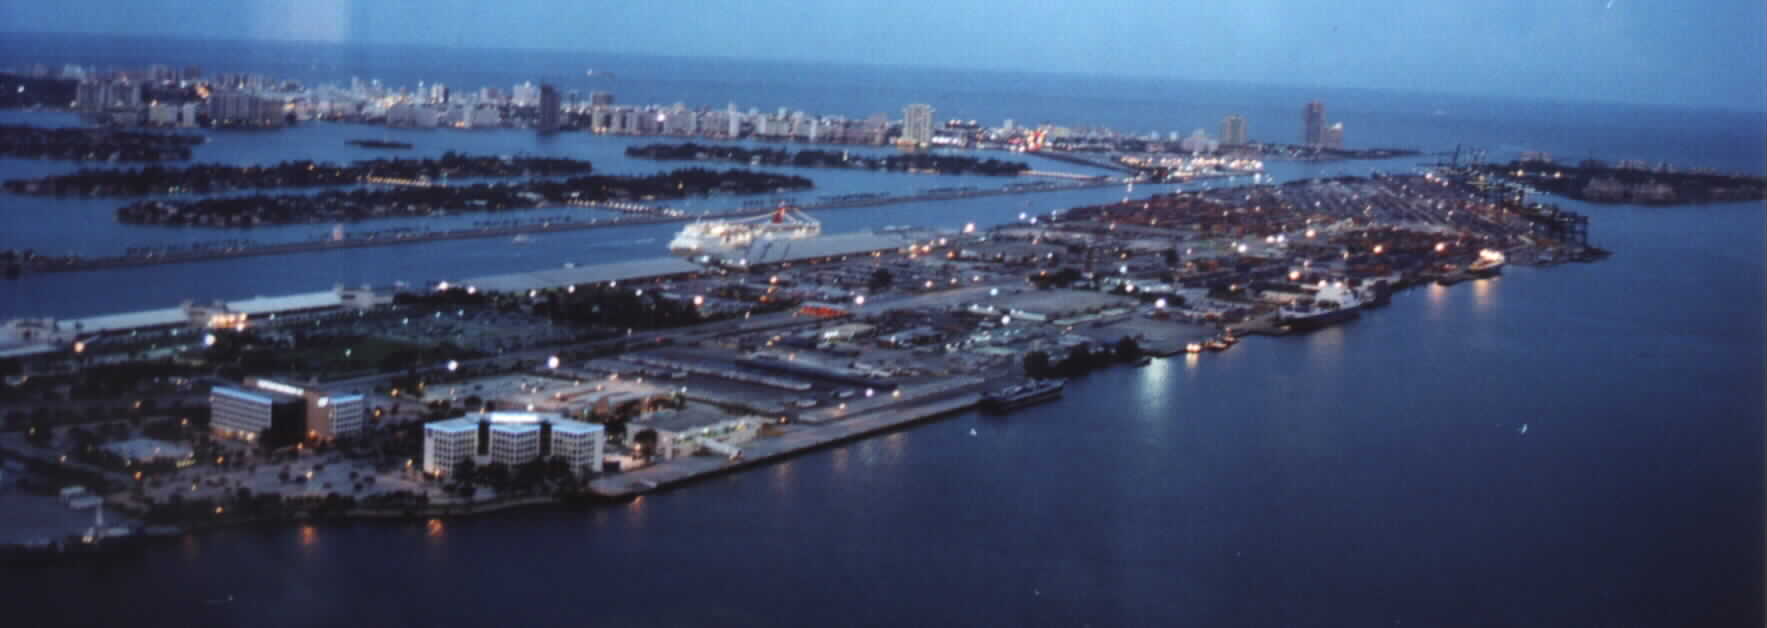 (Photographed by Noe Dorestant 7/20/2000: A bird eyeview of the Port of Miami and Miami Beach as seen from the top of the tallest building in Miami)Picture
photographed and provided by Noe Dorestant, if you copy for reuse, give credit where credit is due. 